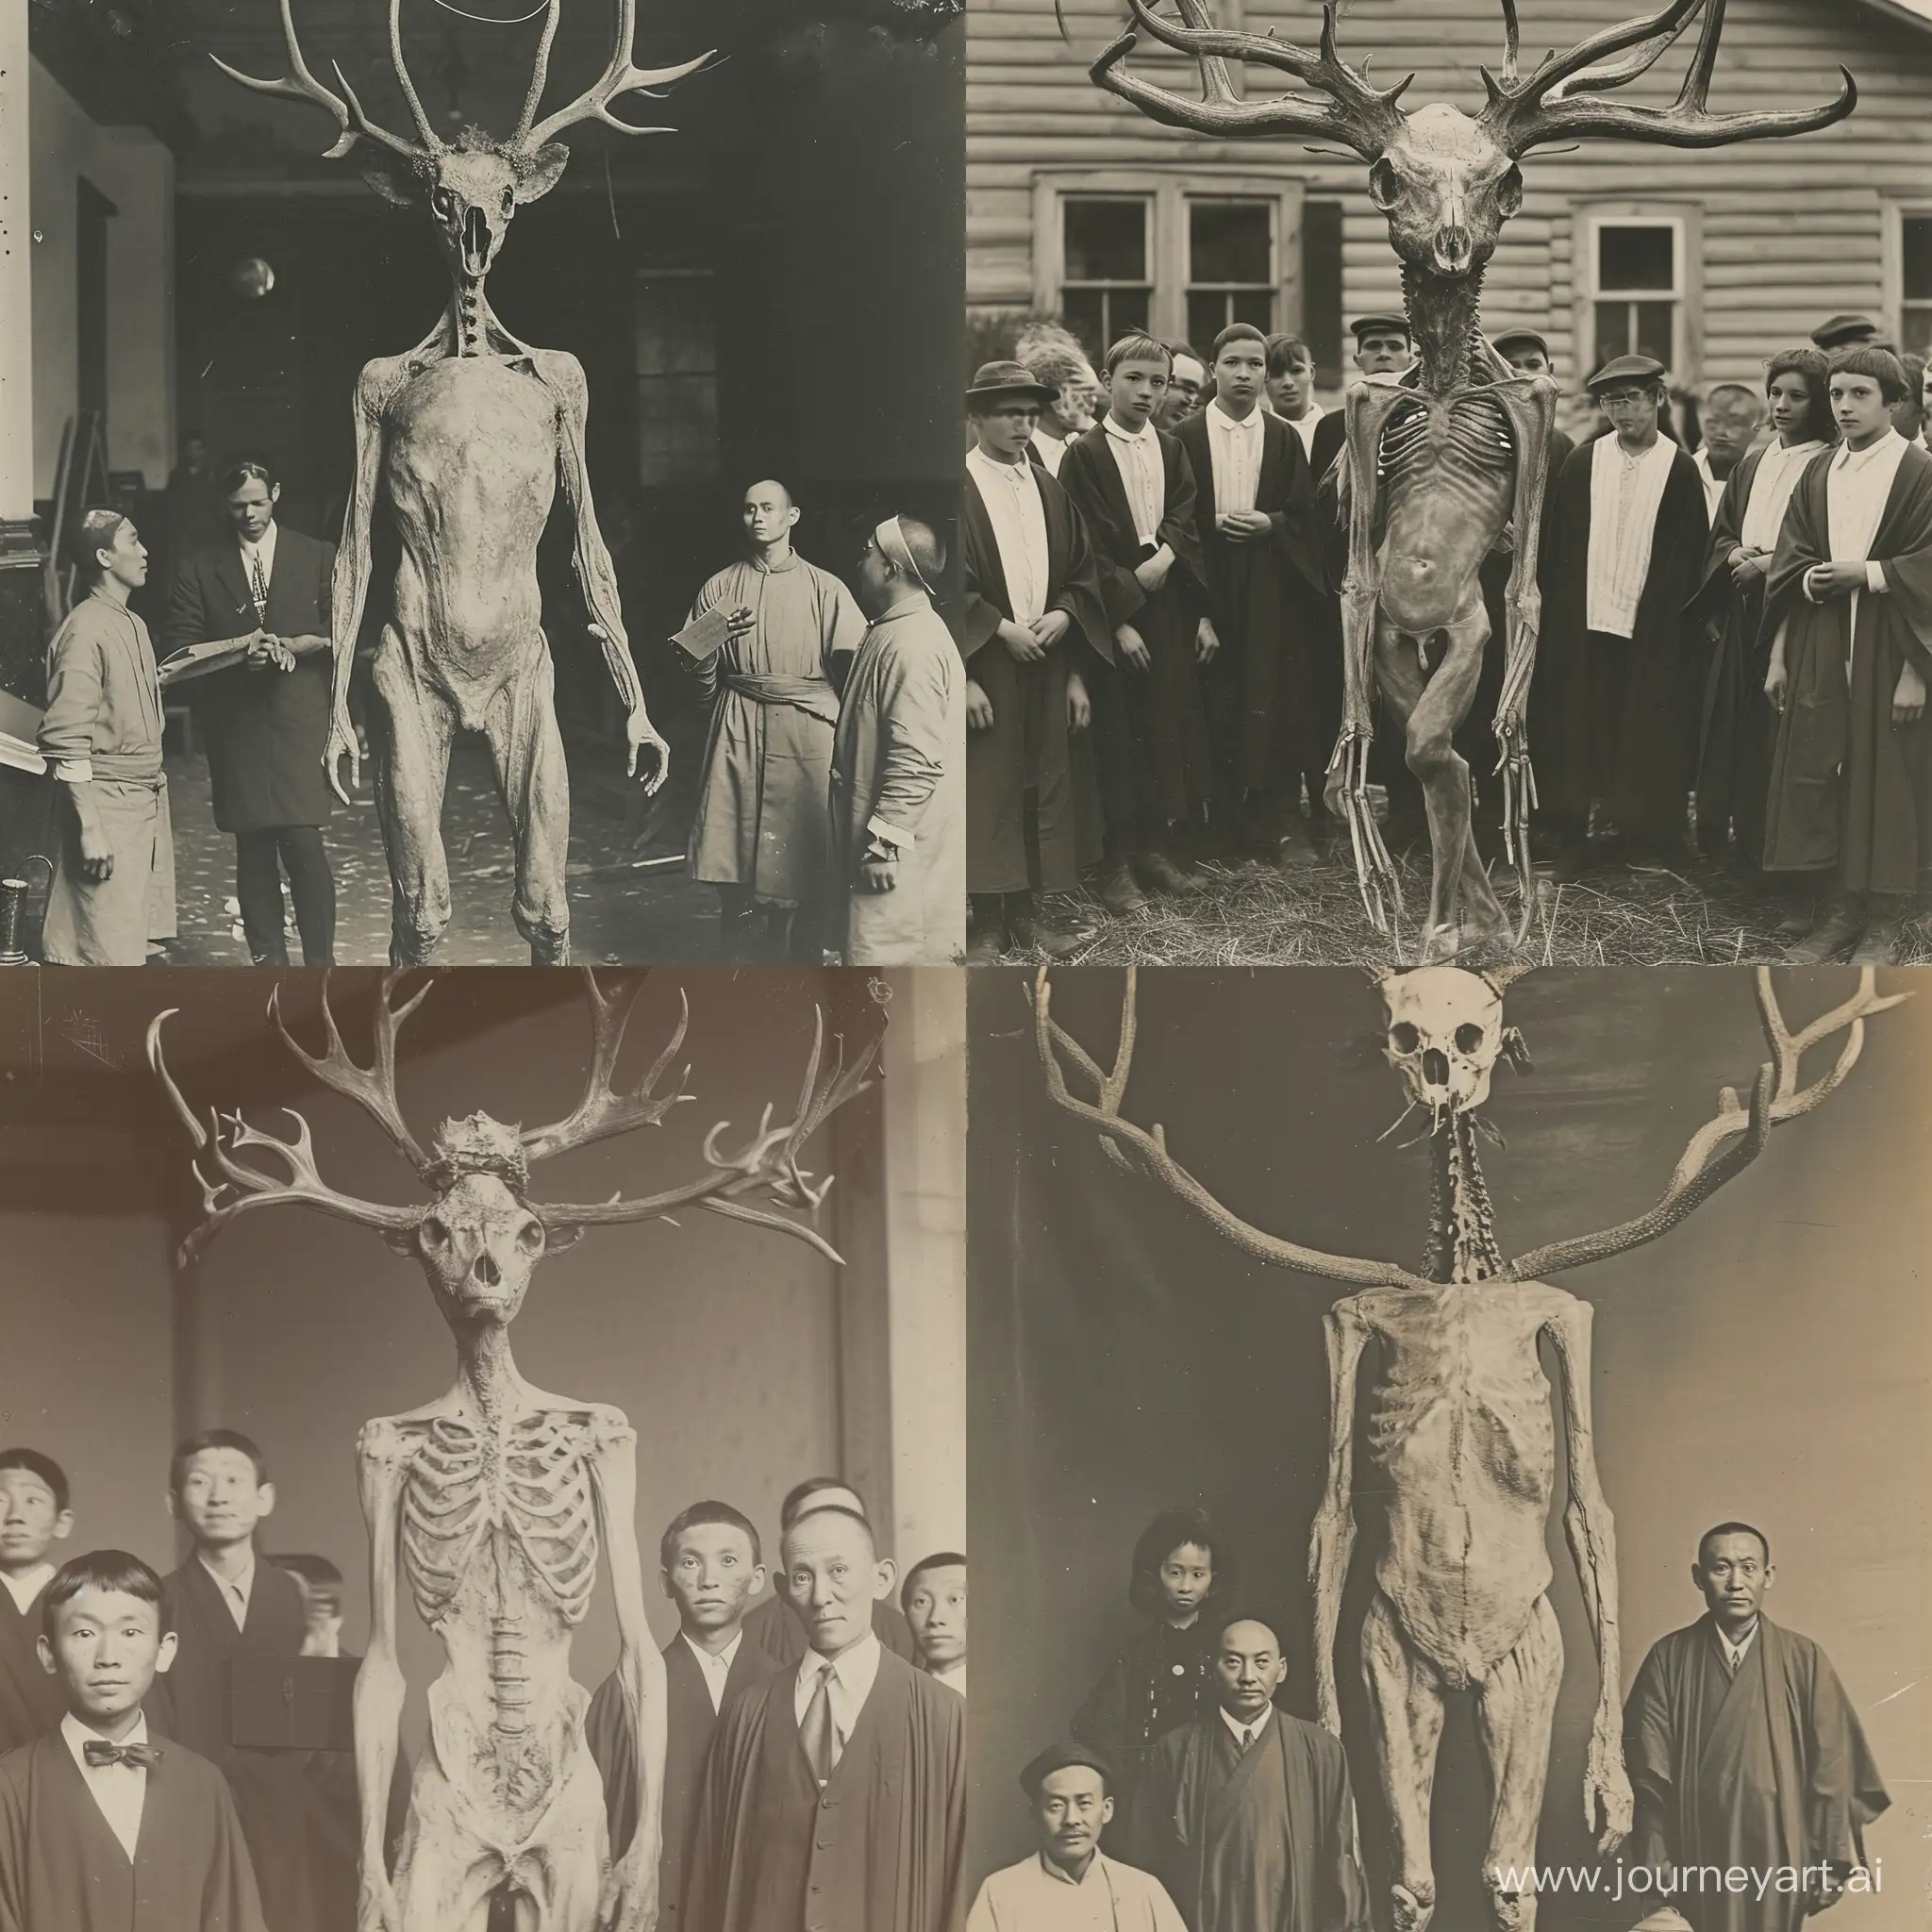 Enigmatic-Leshy-with-Deer-Skull-and-Scholars-in-Vintage-Photograph